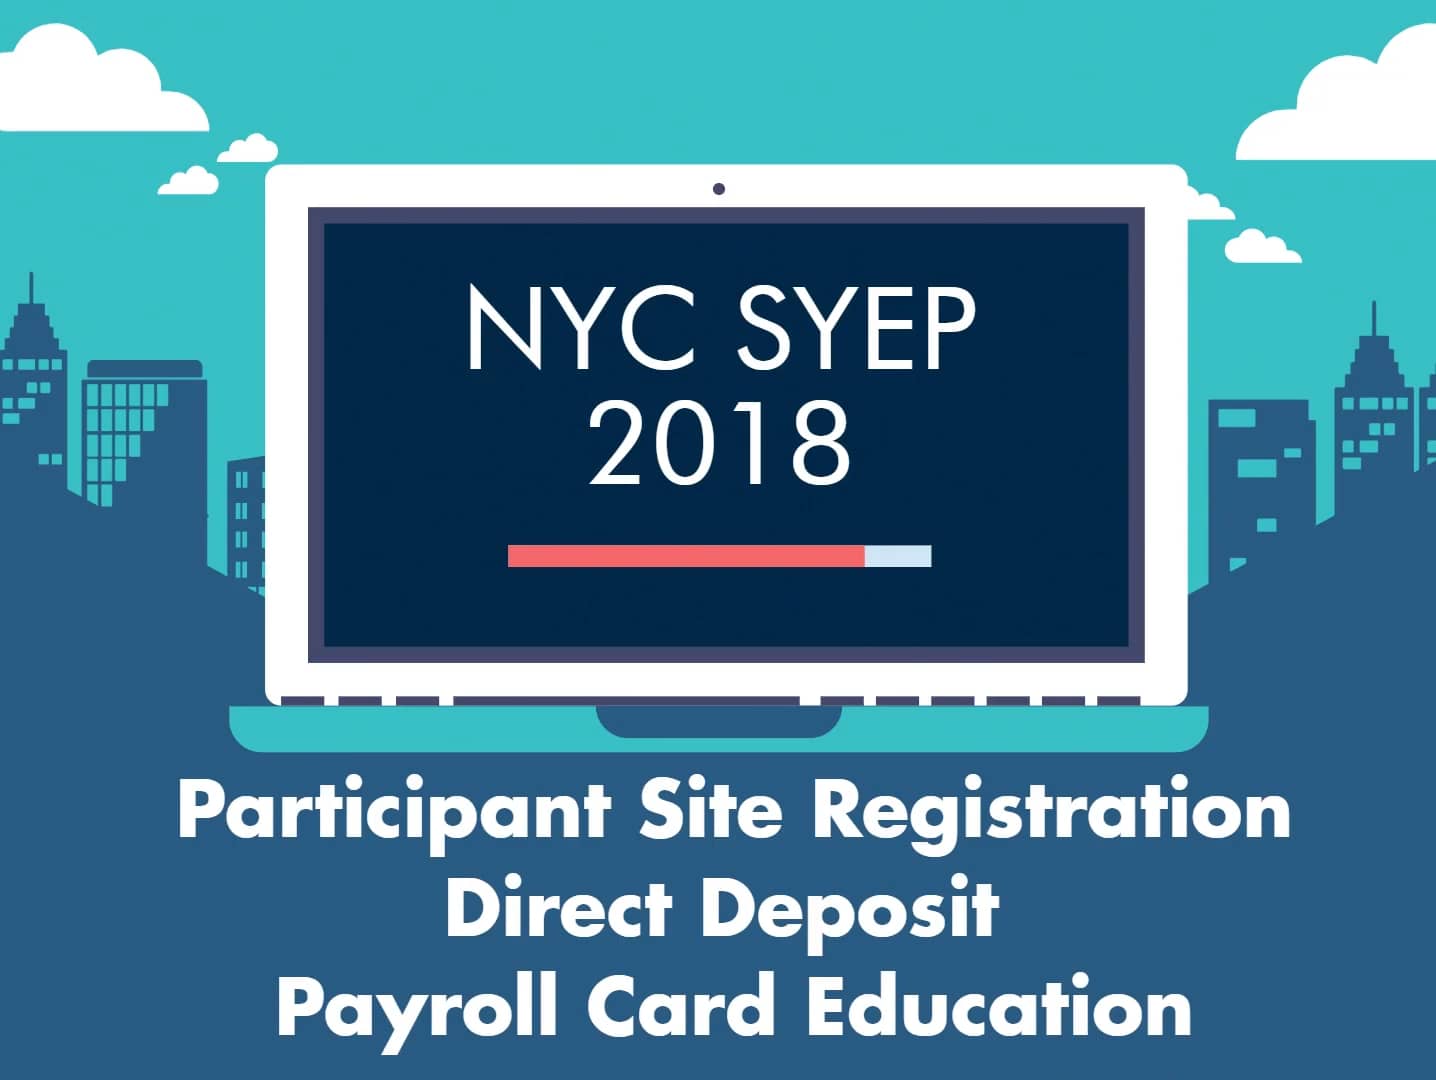 NYC SYEP 2018 Participant Site Registration, Direct Deposit Sign Up